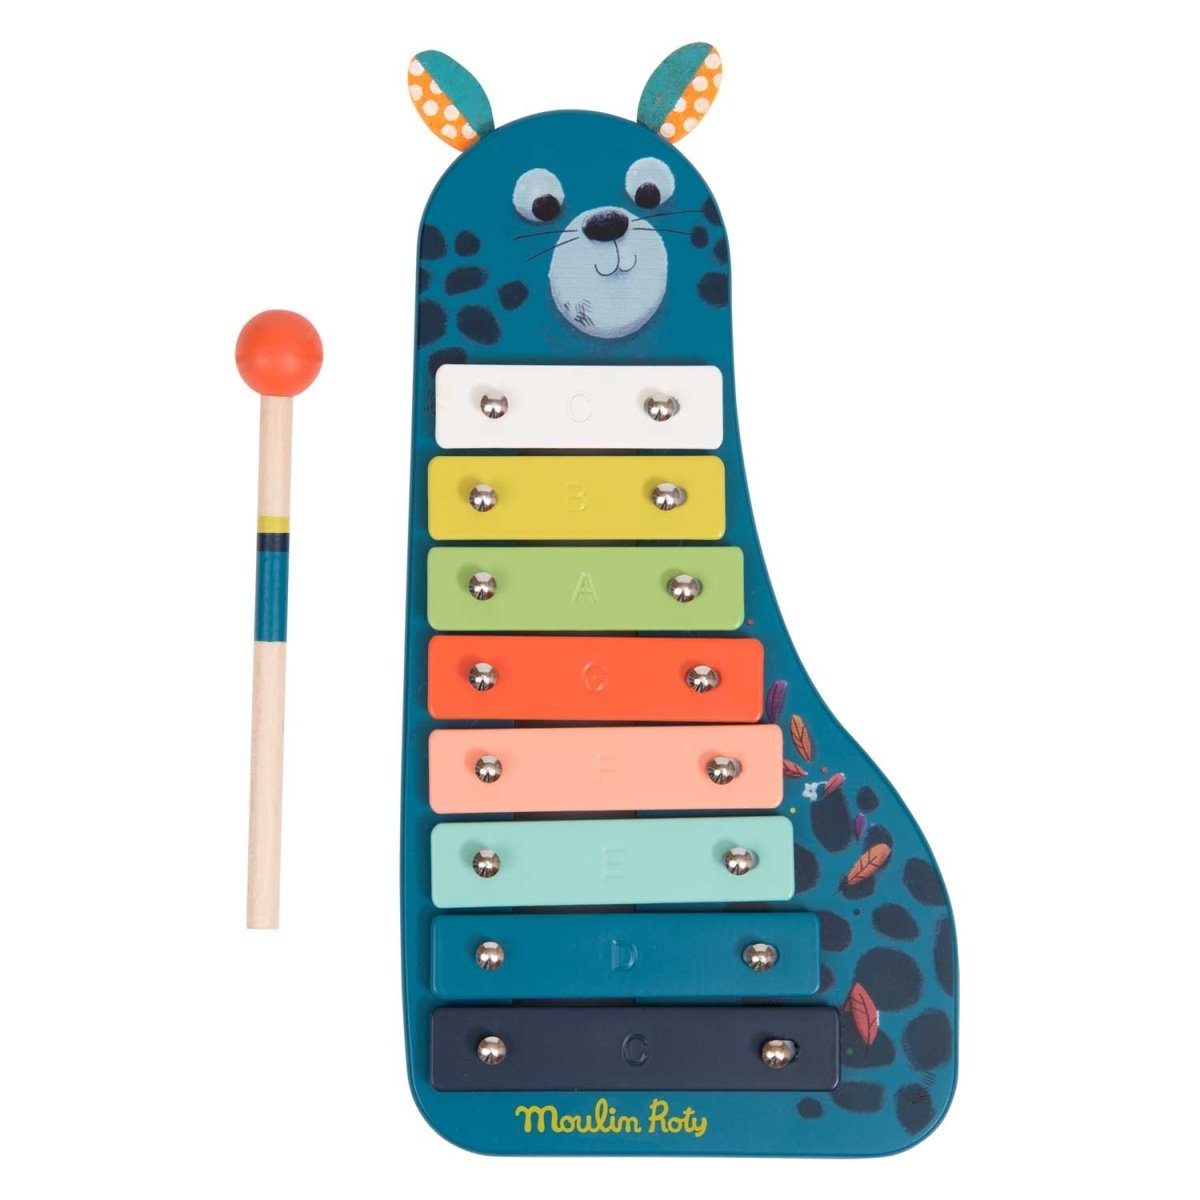 Moulin Roty Xylophon Xylophon Dschungel 25,5cm Musikinstrument Kinder